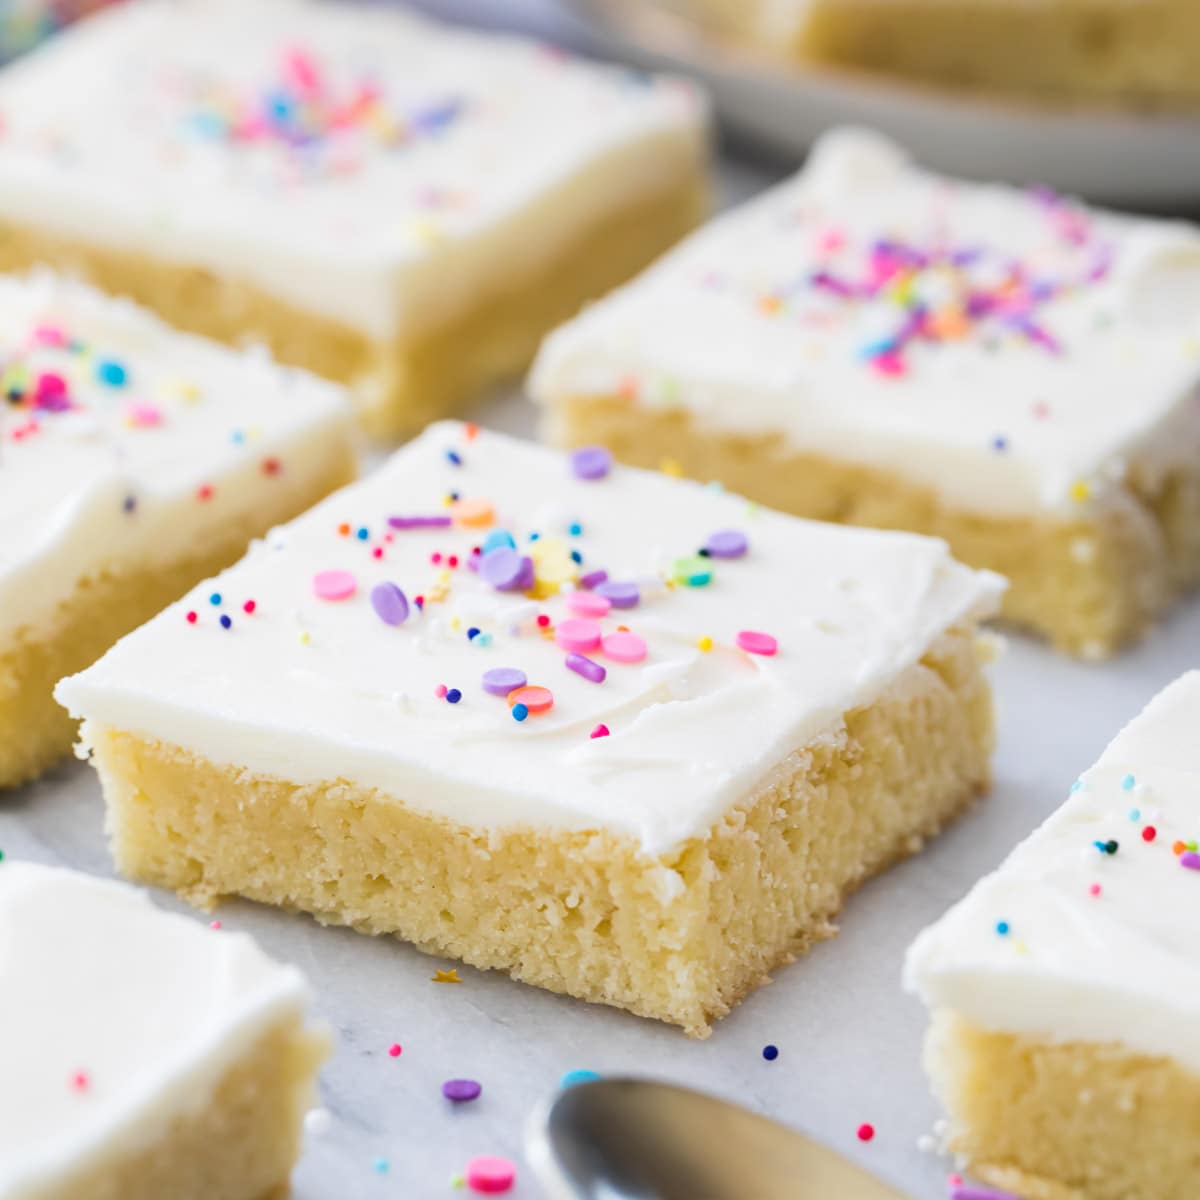 Sugar Cookie Bars - Together as Family